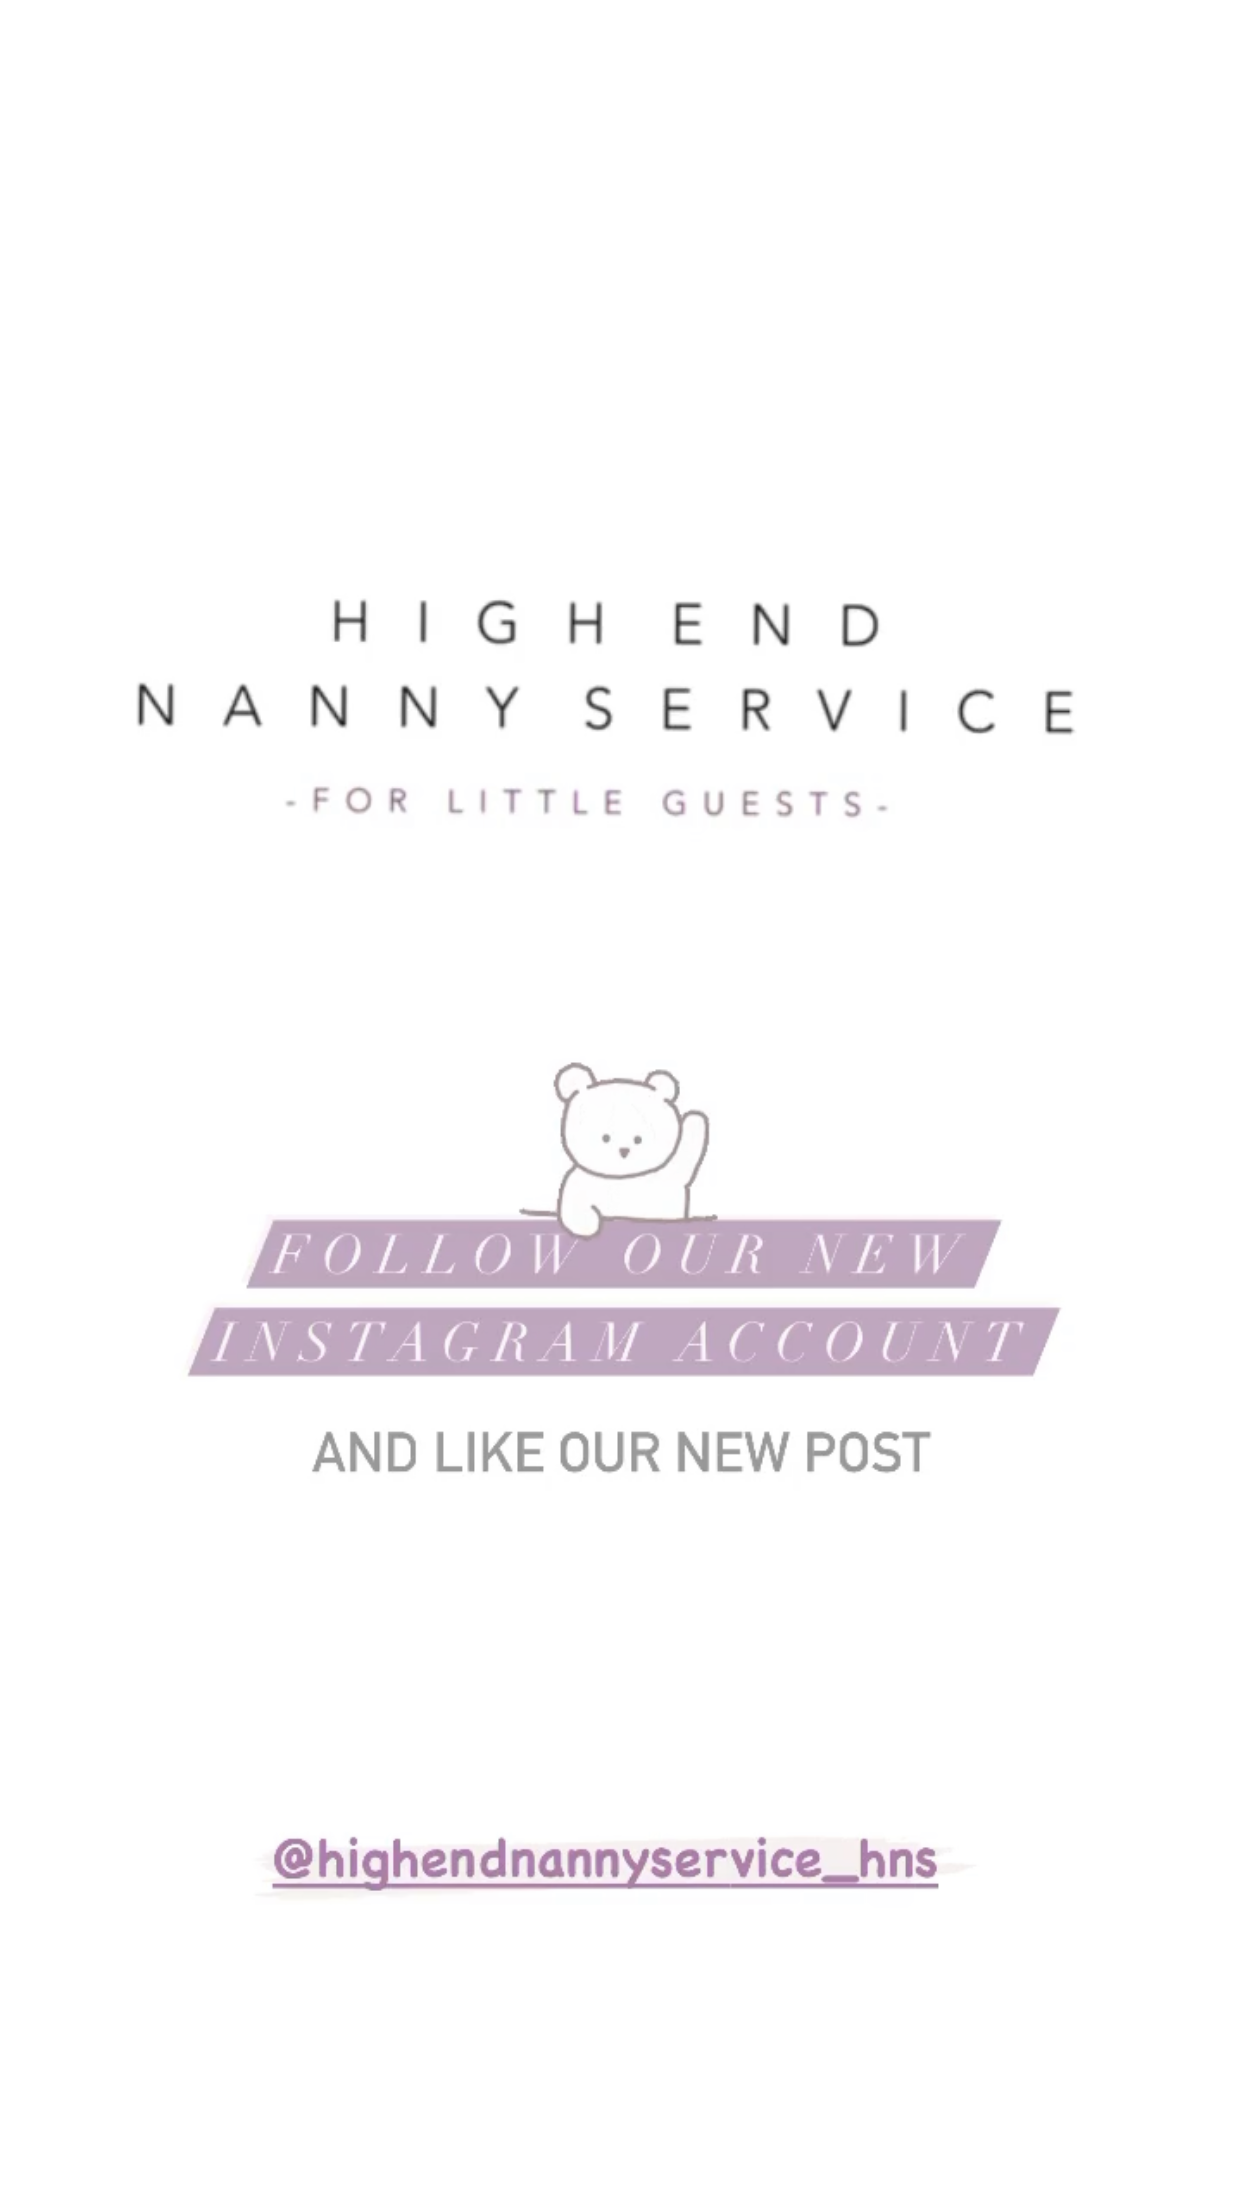 Our new High End Nanny Service Instagram account